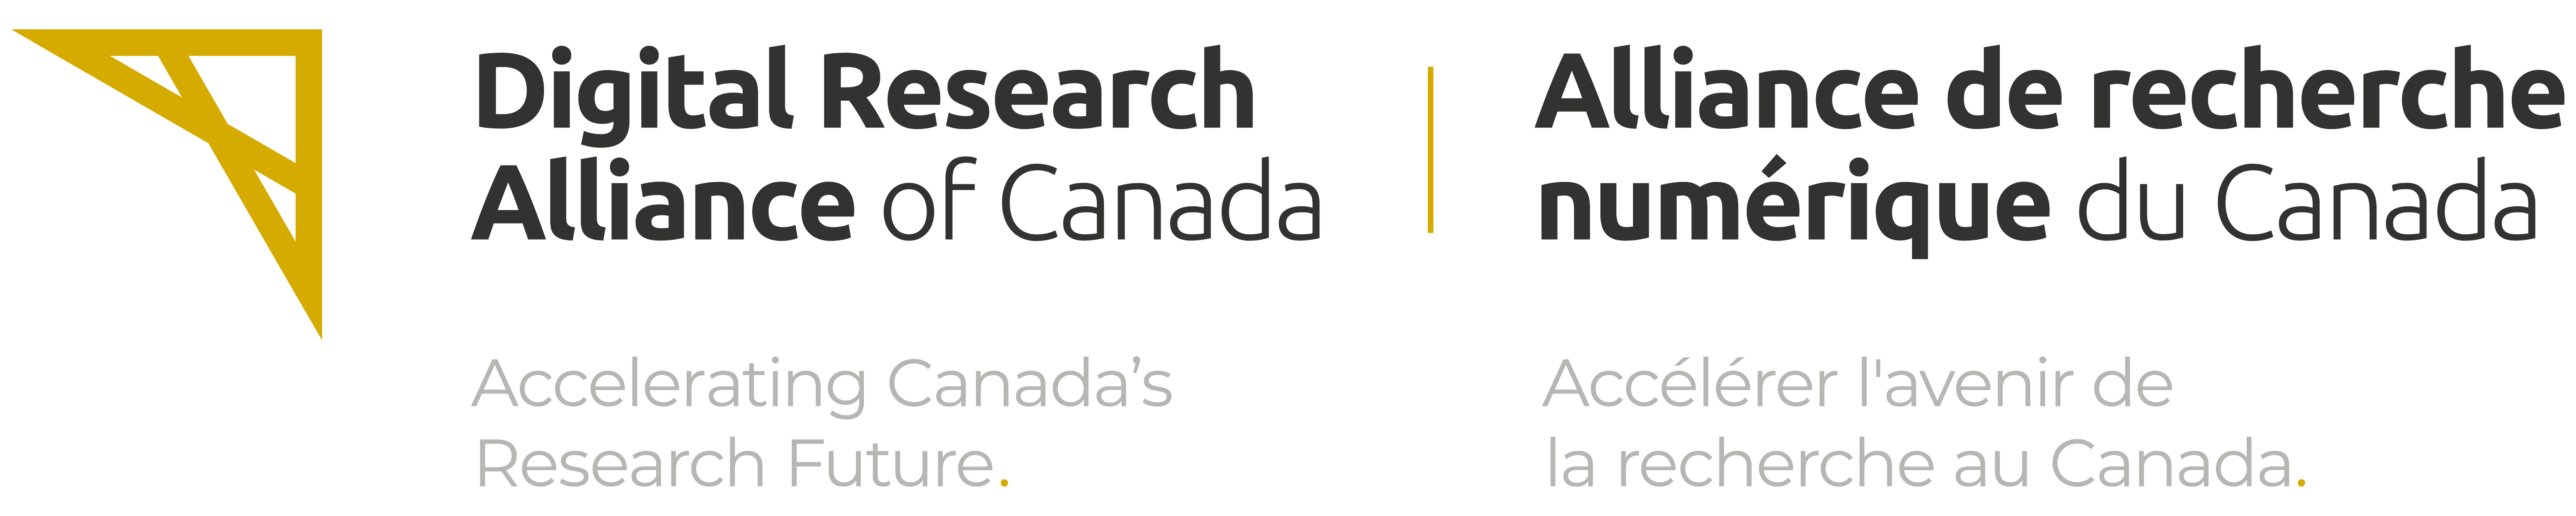 Digital Research Alliance of Canad